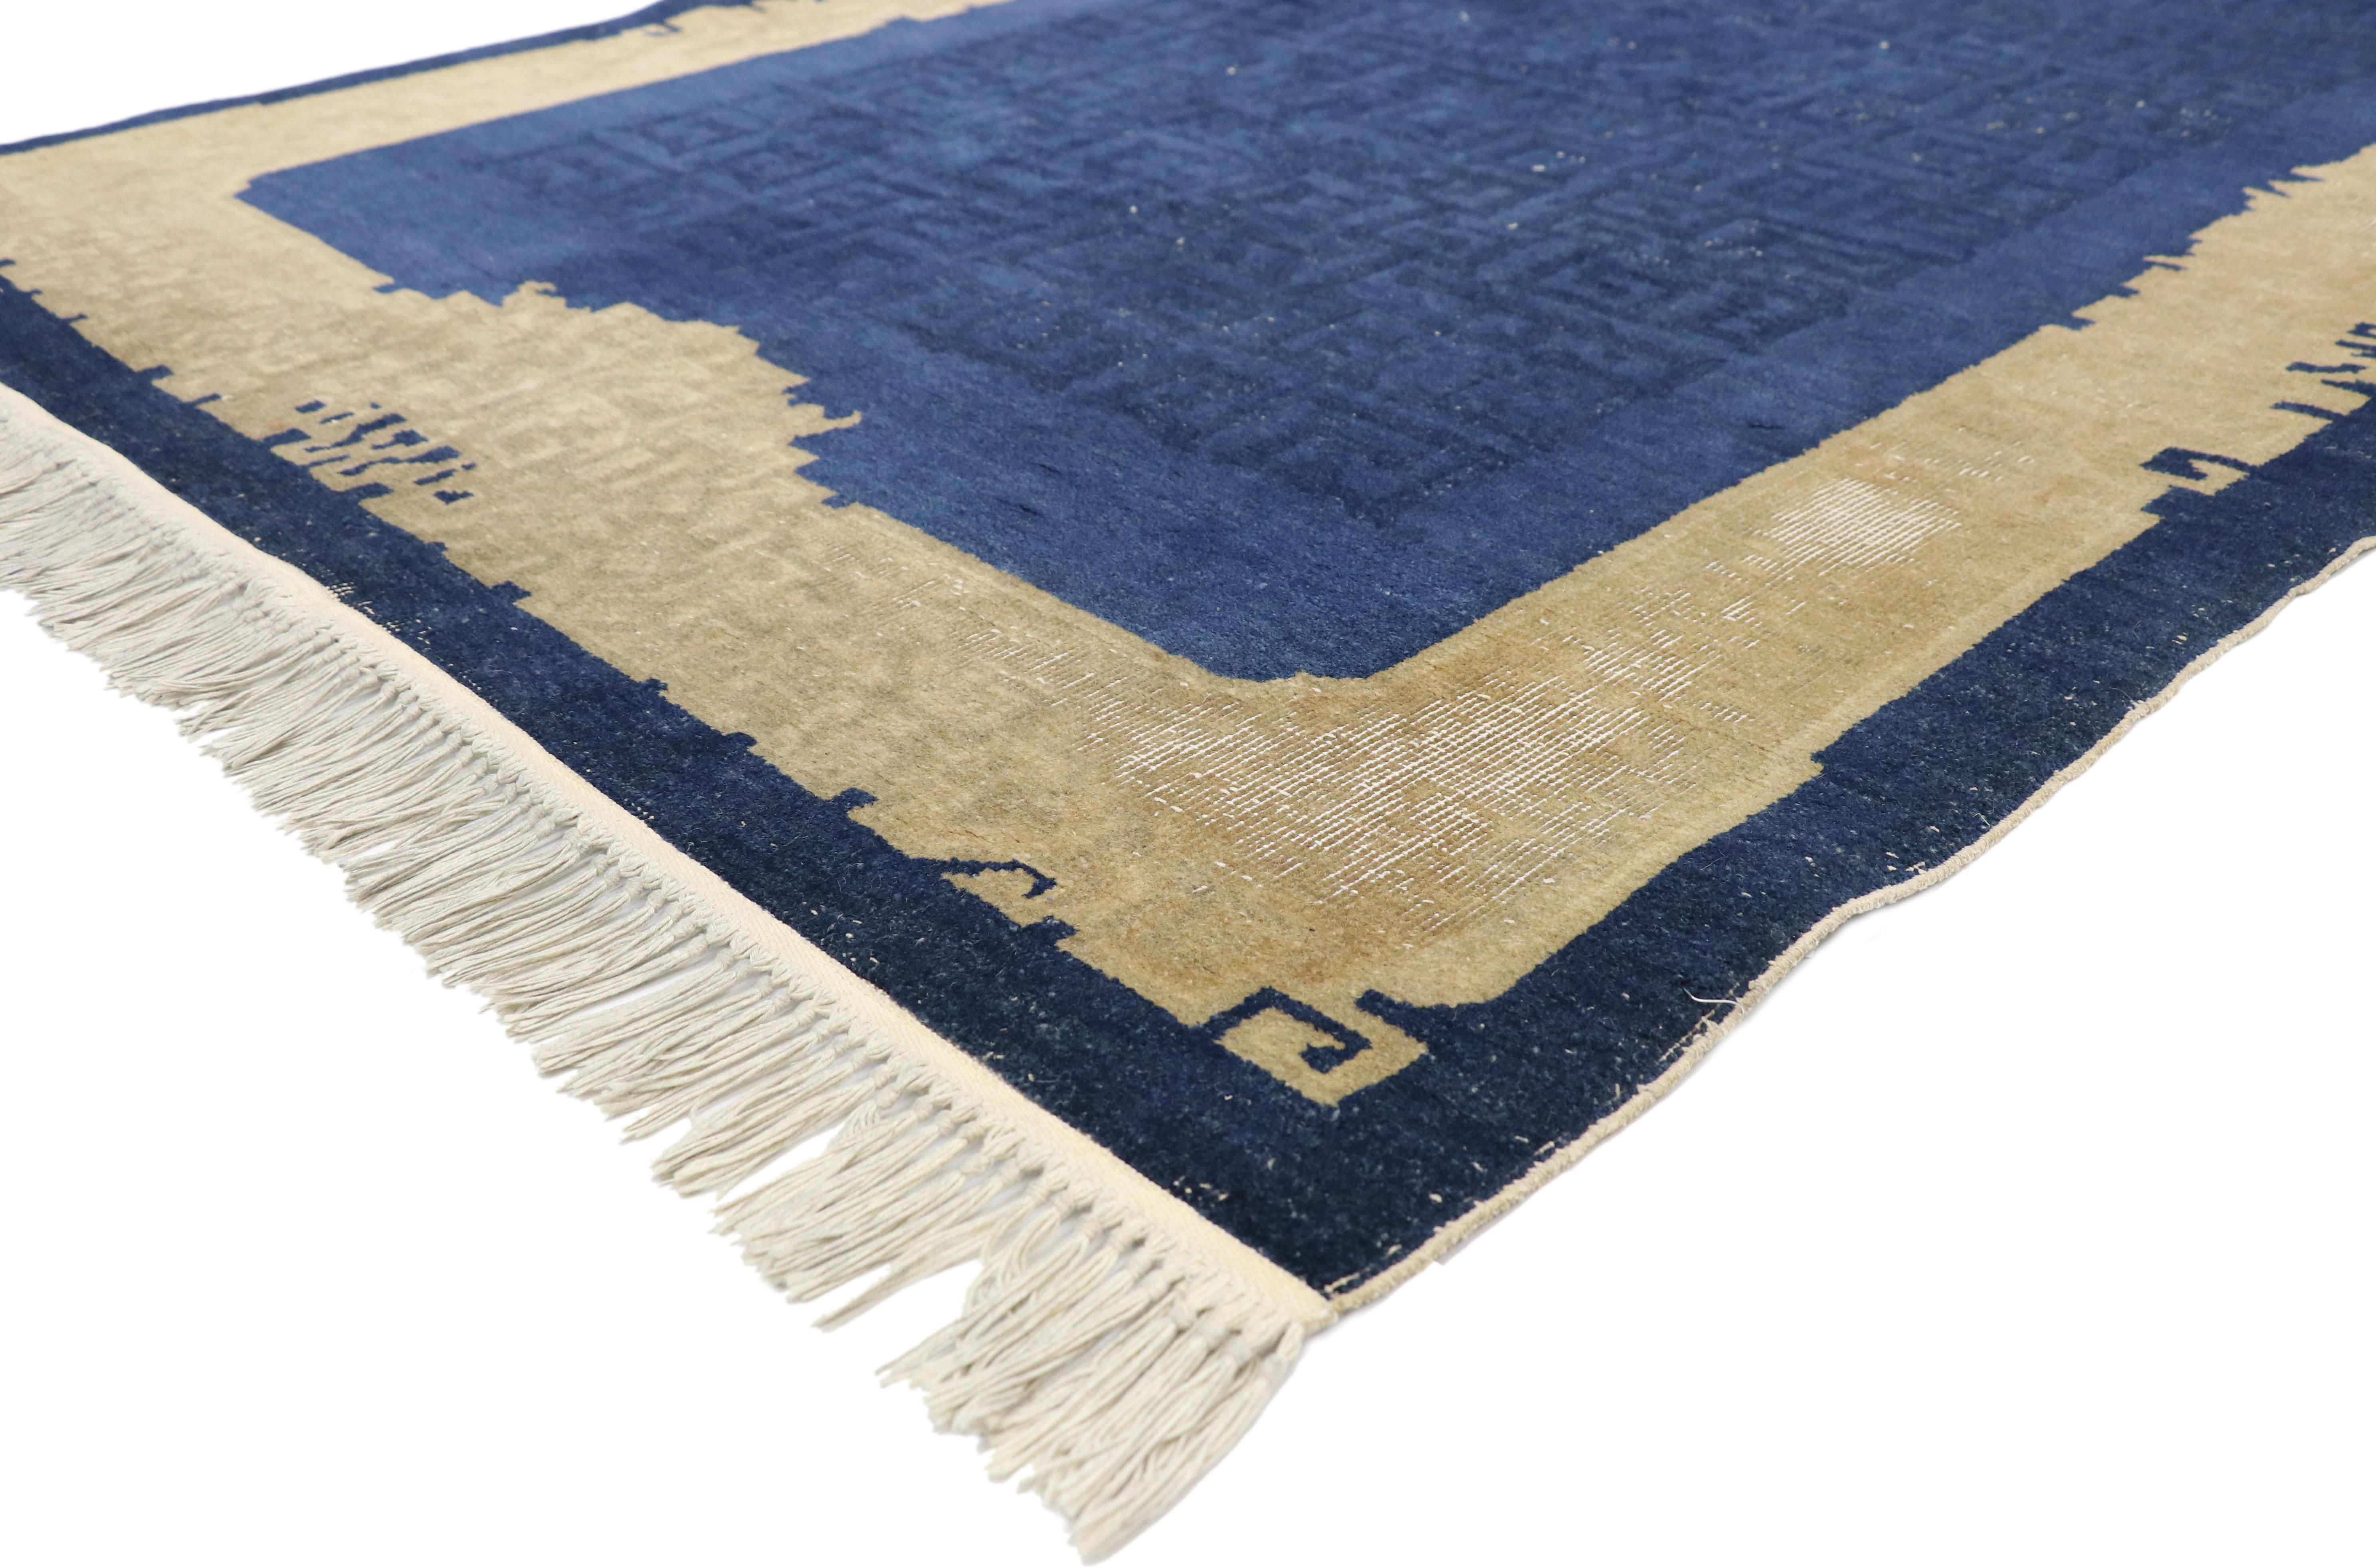 77364, distressed antique Chinese rug with Traditional chinoiserie style. This hand knotted wool distressed antique Chinese rug features a subtle all-over fretwork pattern spread across an abrashed blue field. In written Chinese, the Wan character